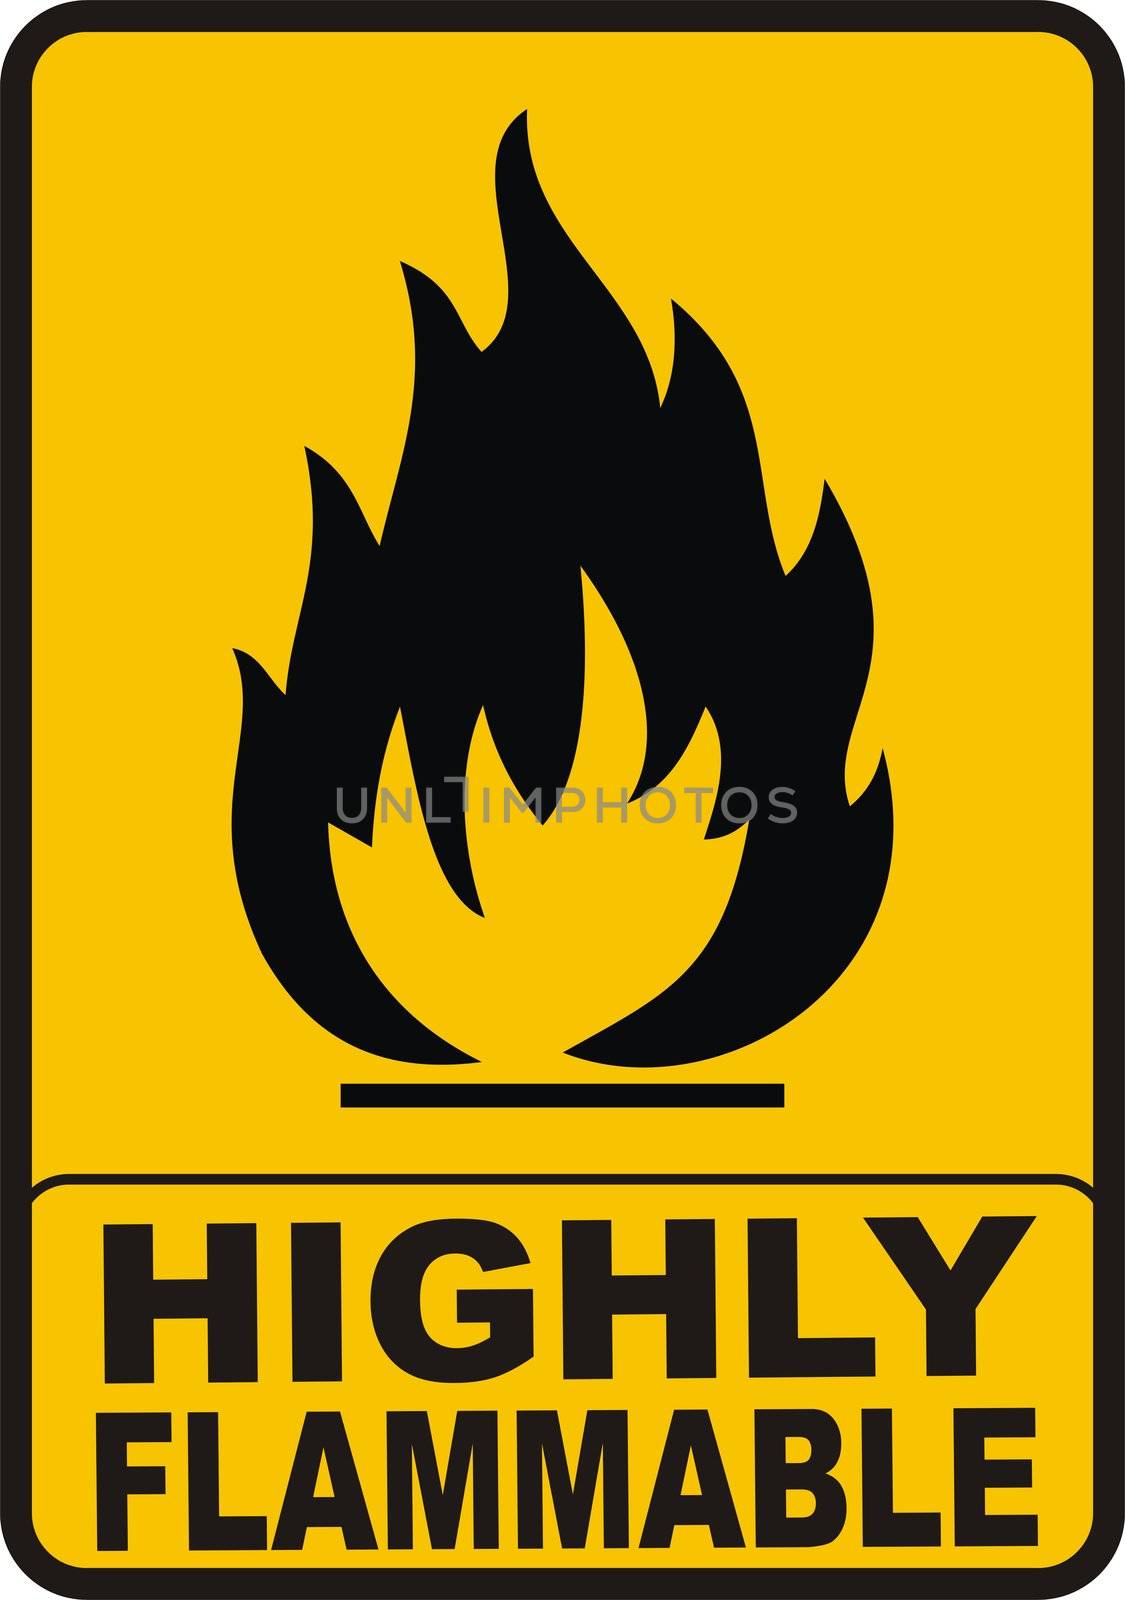 Highly Flamable by tony4urban